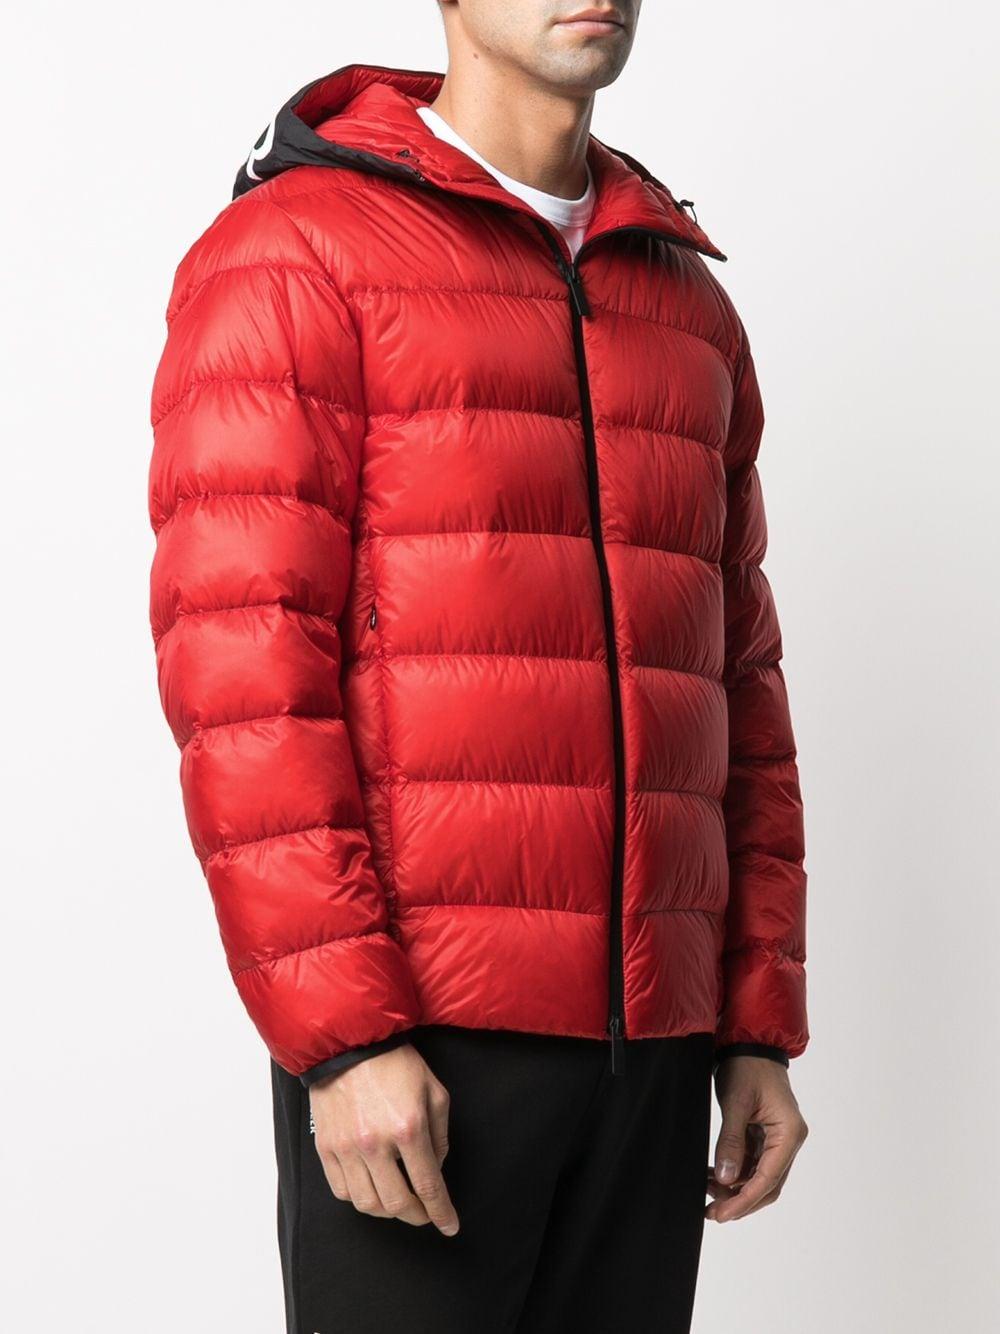 Moncler Hooded Padded Down Jacket in Red for Men - Lyst